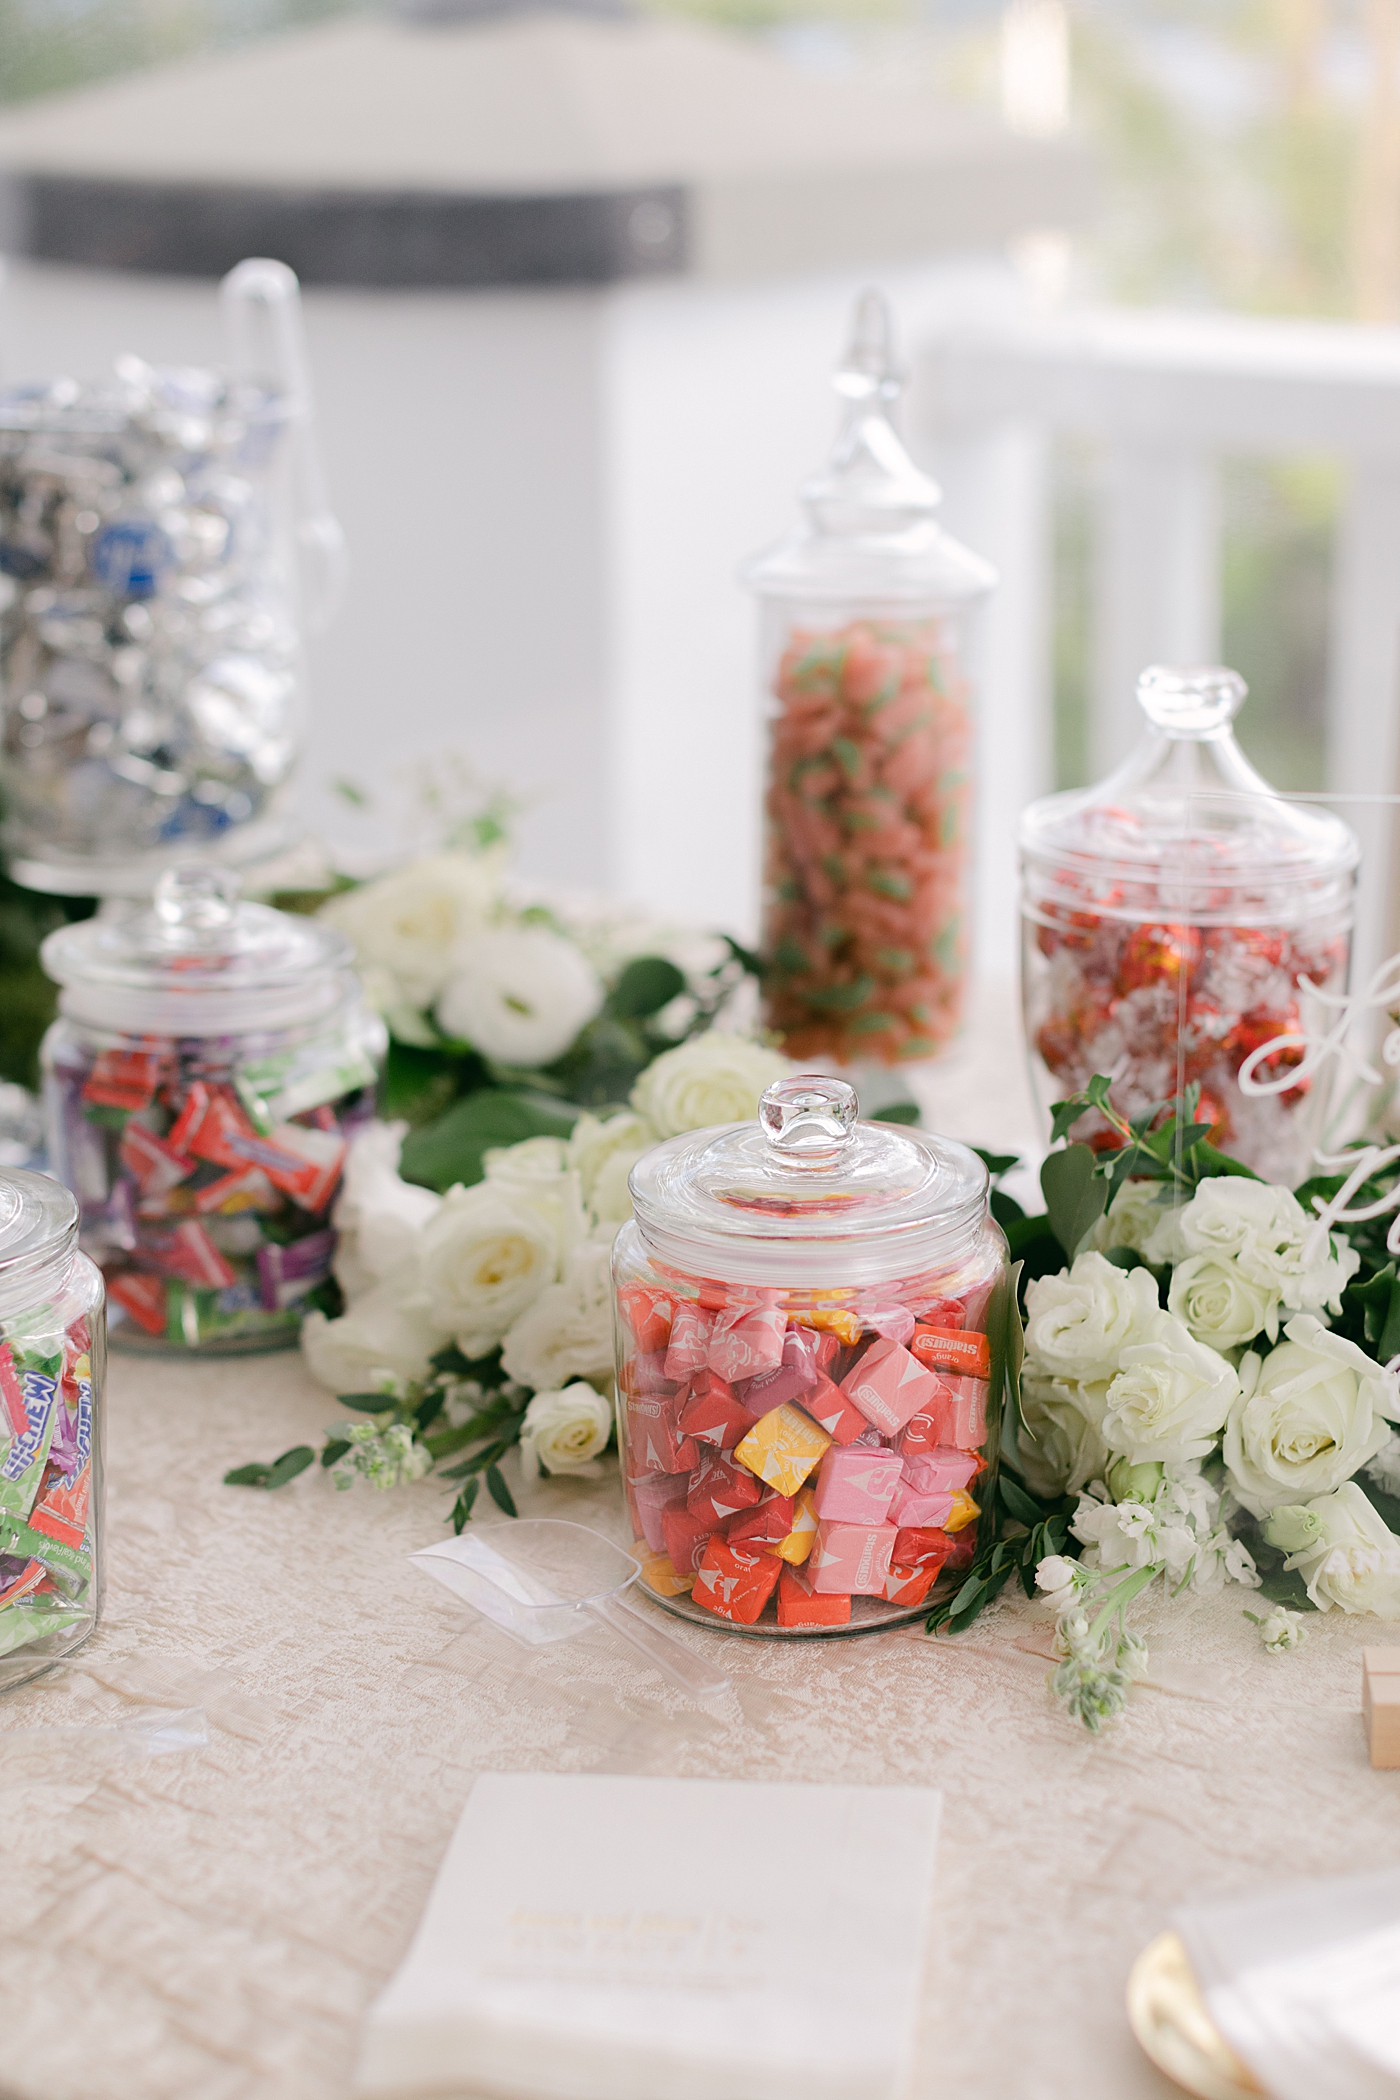 Reception candy table details during their Sagamore Wedding | Image by Hope Helmuth Photography